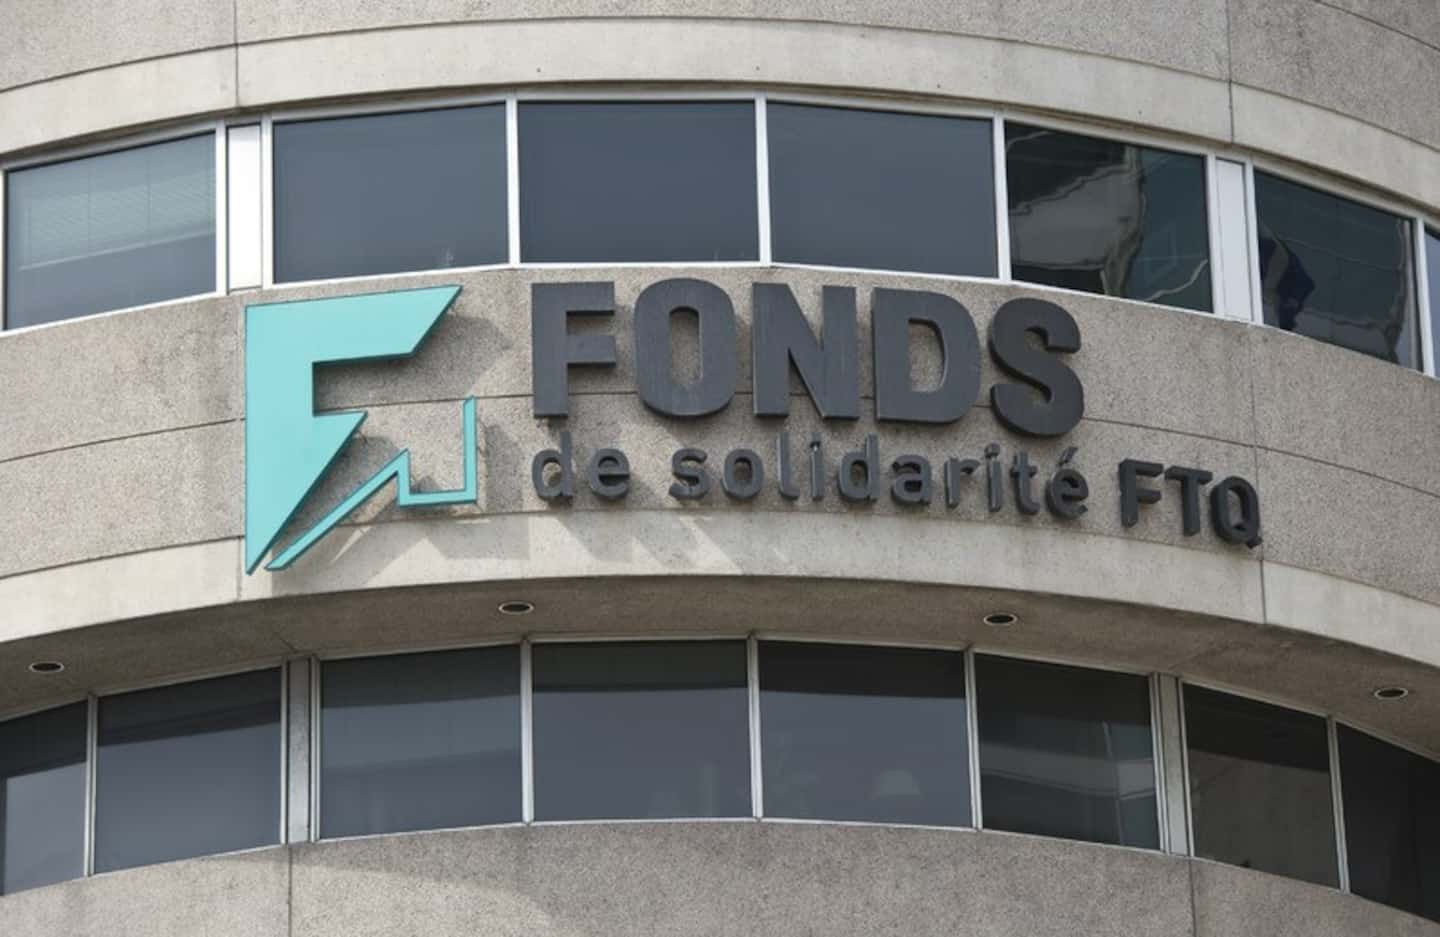 Business takeovers: the Fonds FTQ fights every day against outside capital